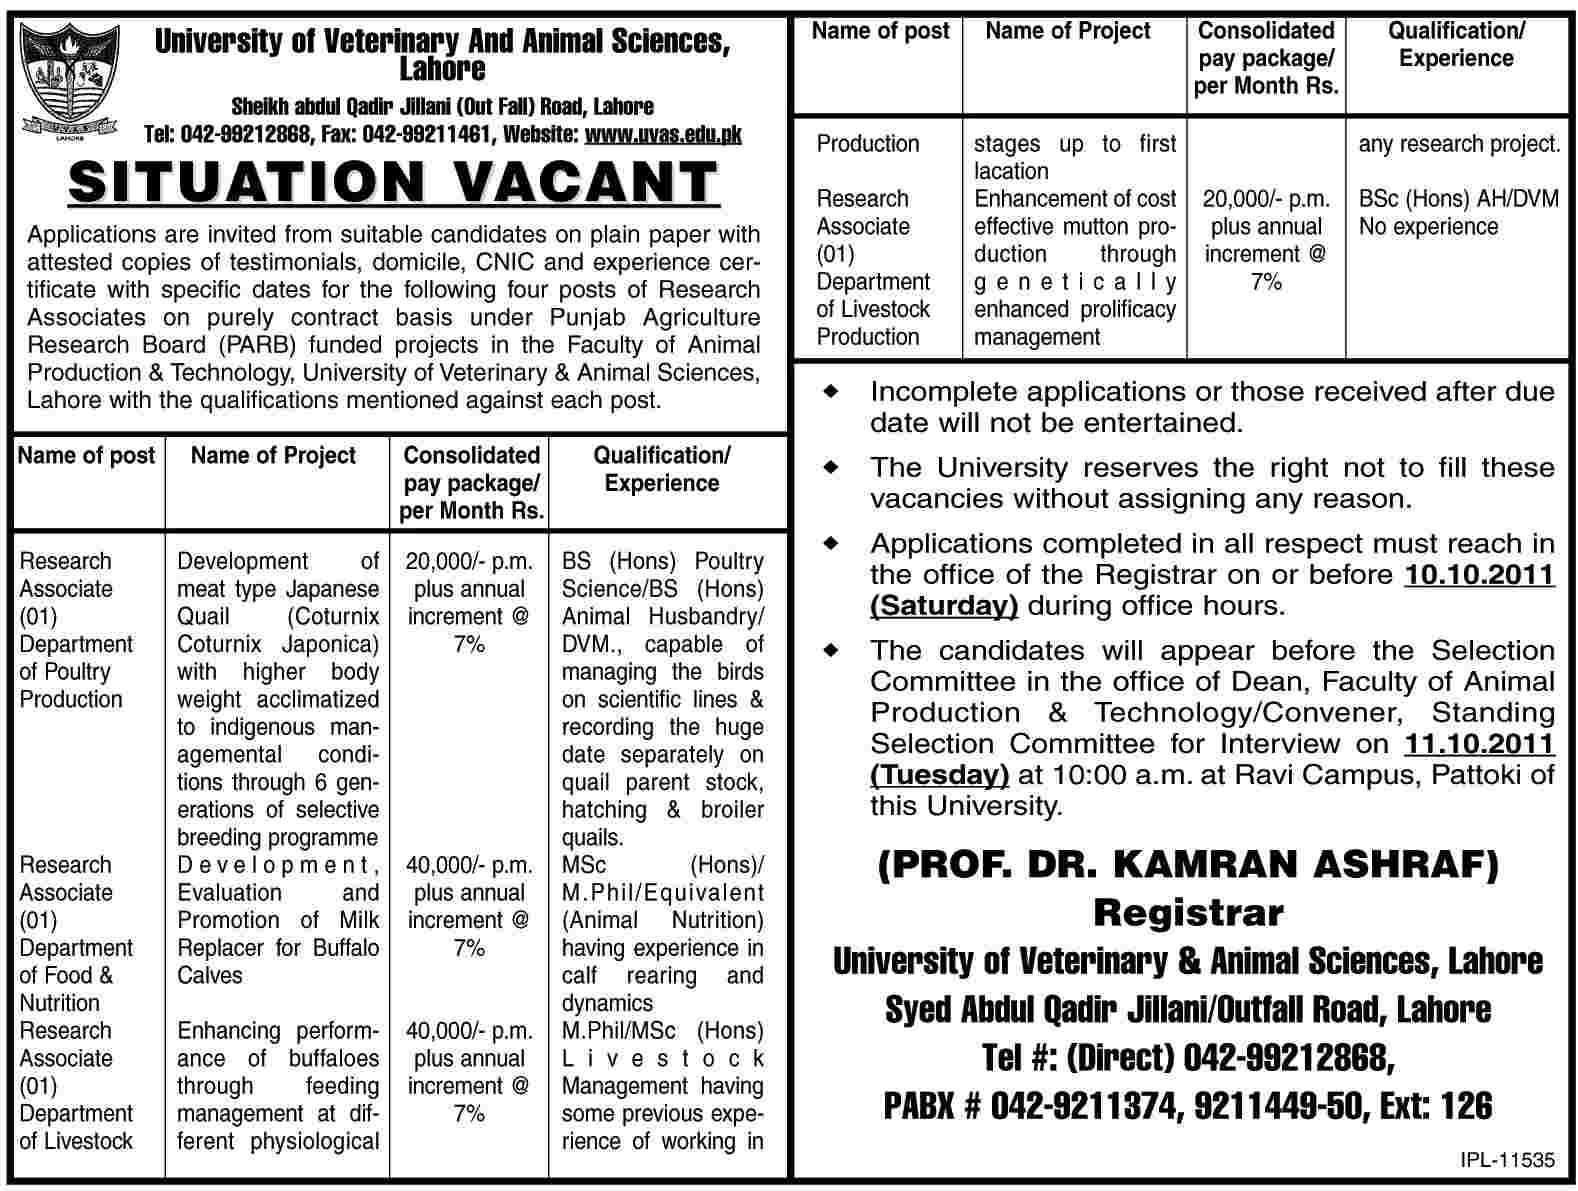 University of Veterinary And Animal Sciences, Lahore Required Research Associates